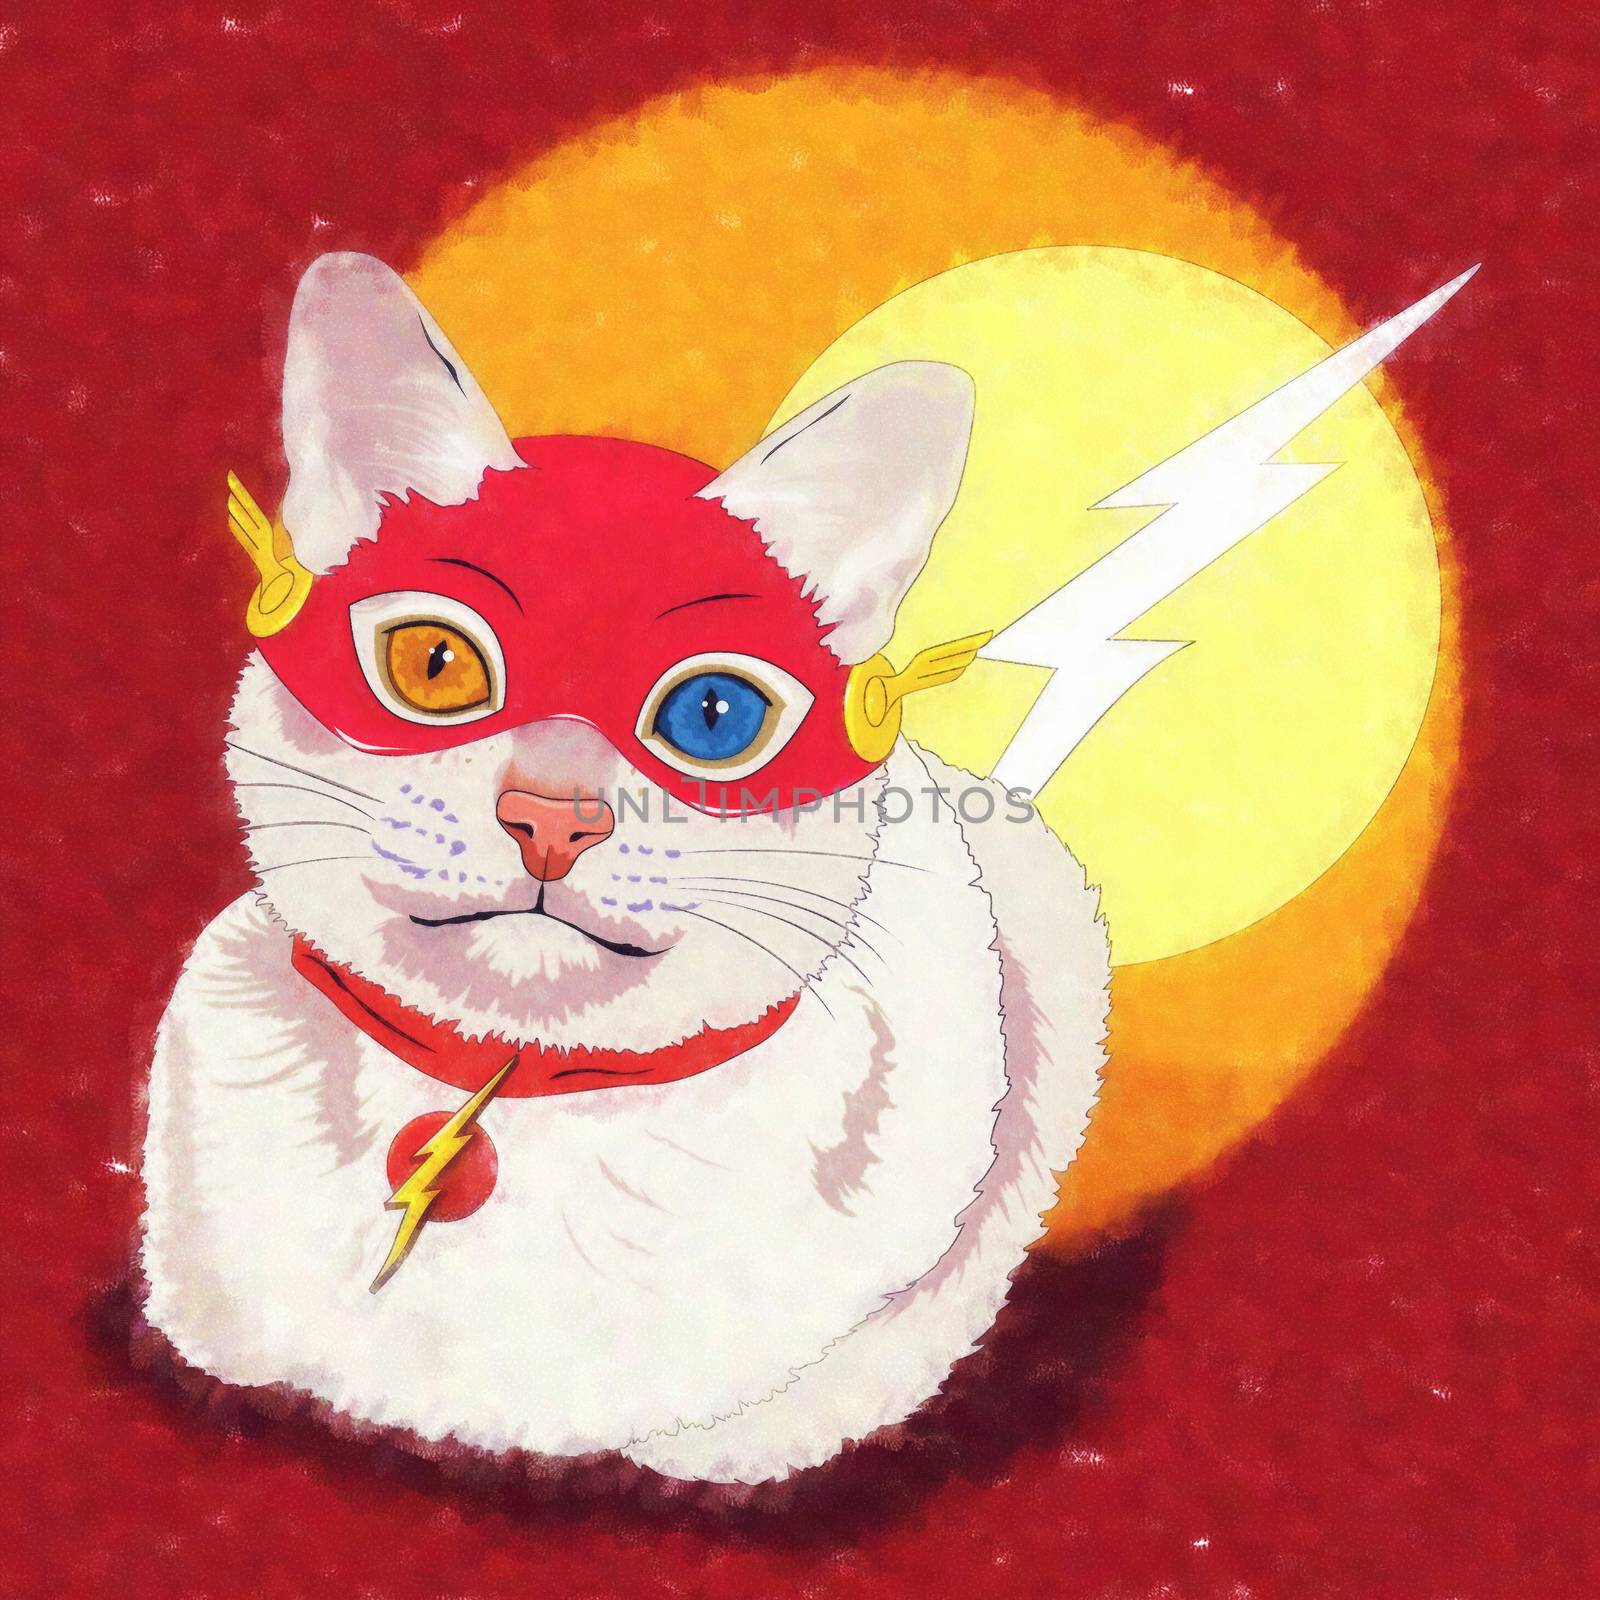 Flash Cat. Watercolor sketch illustration of a cat at home.